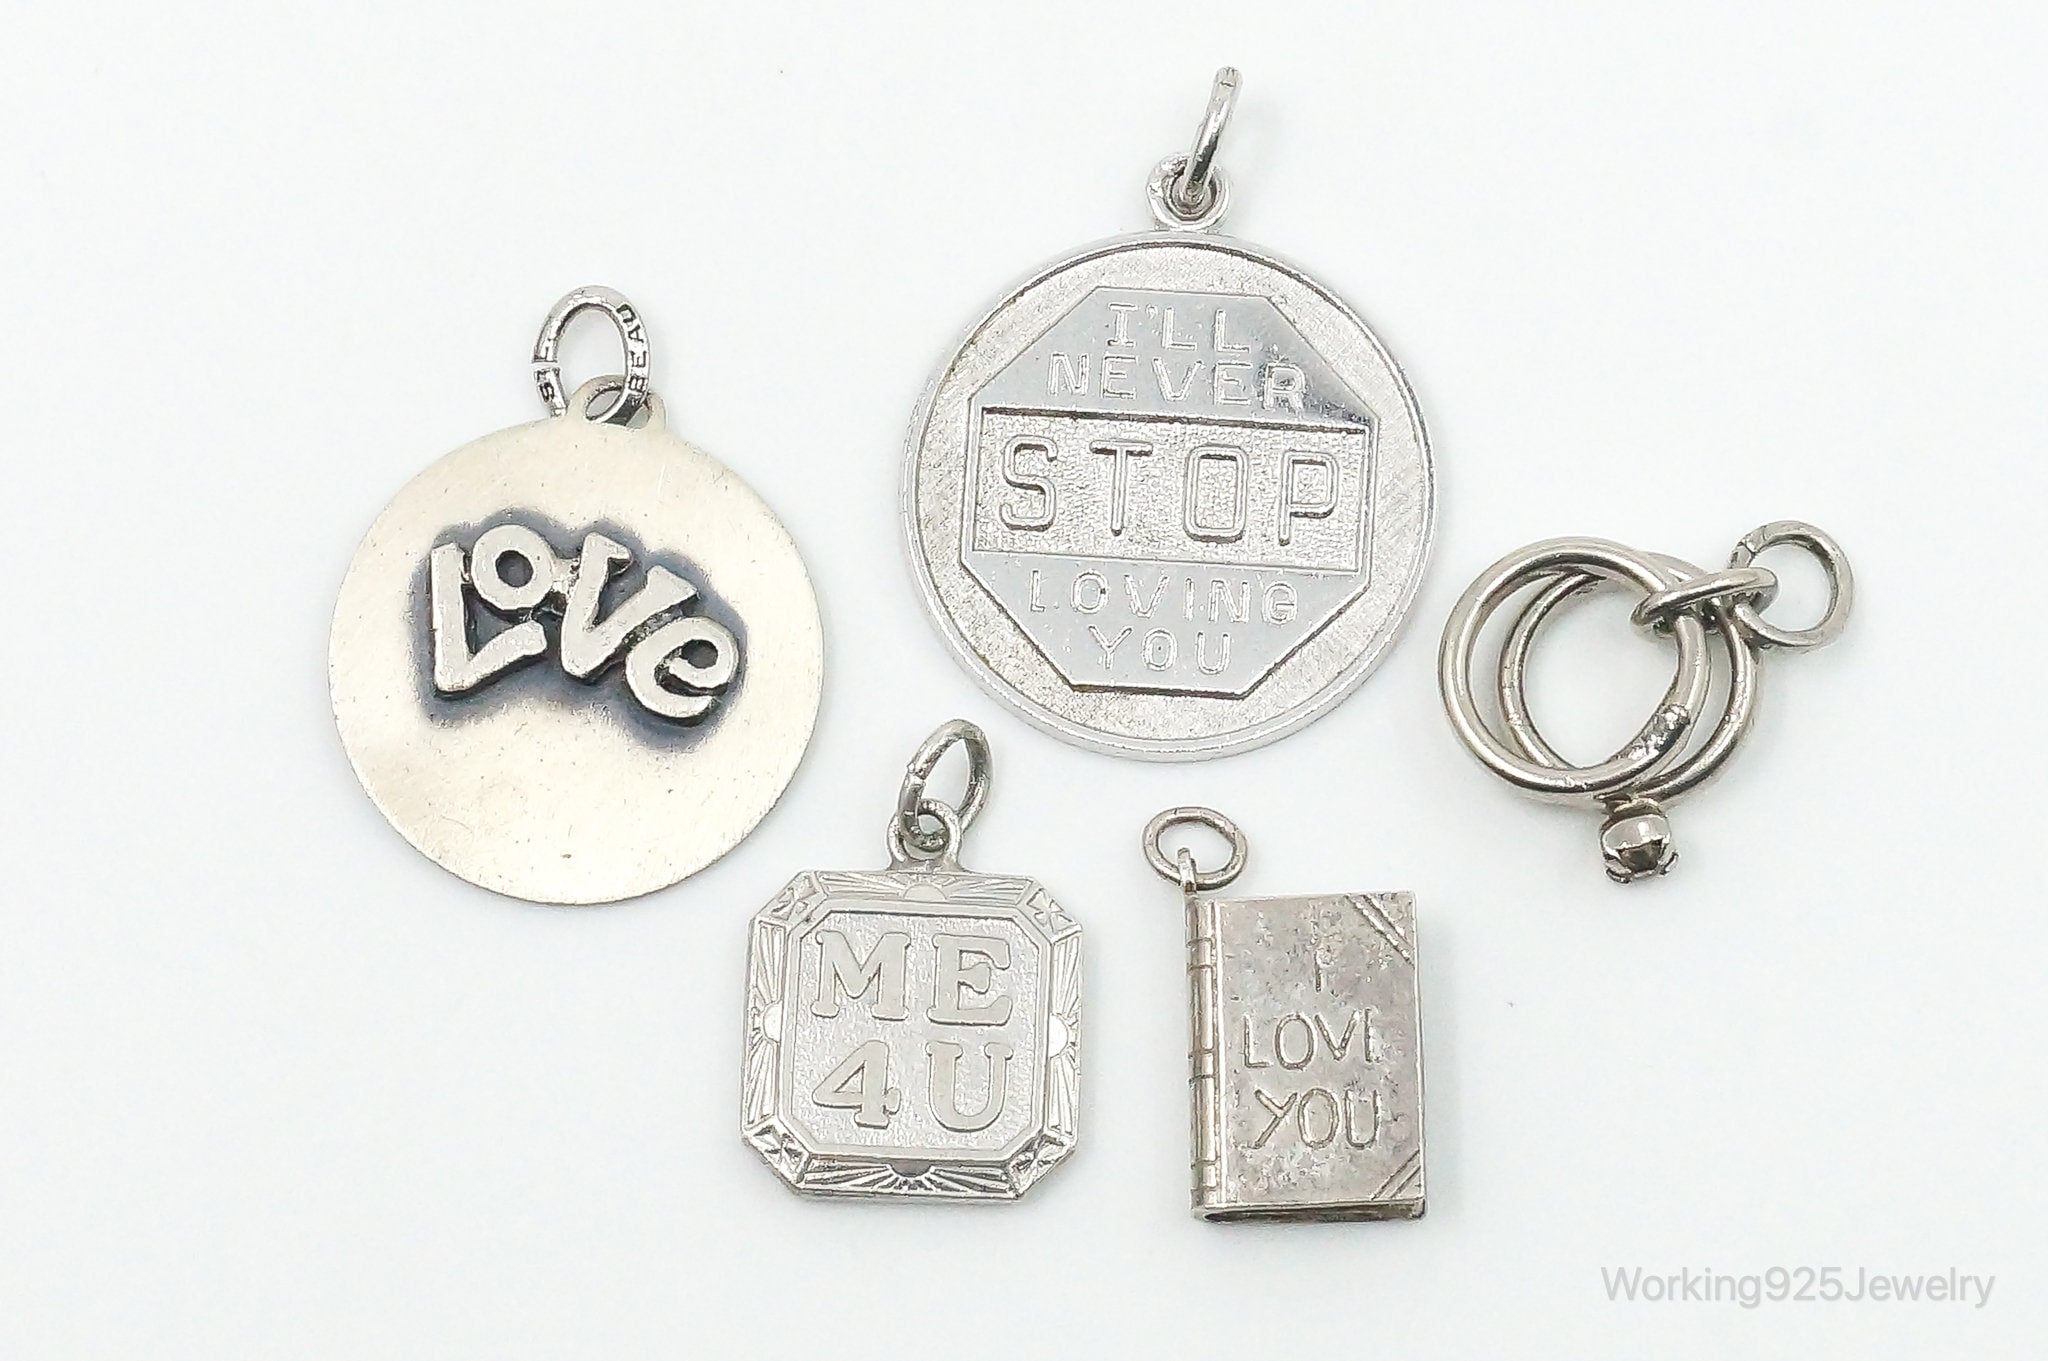 Vintage Antique Love Lover Sterling Silver Charms Lot